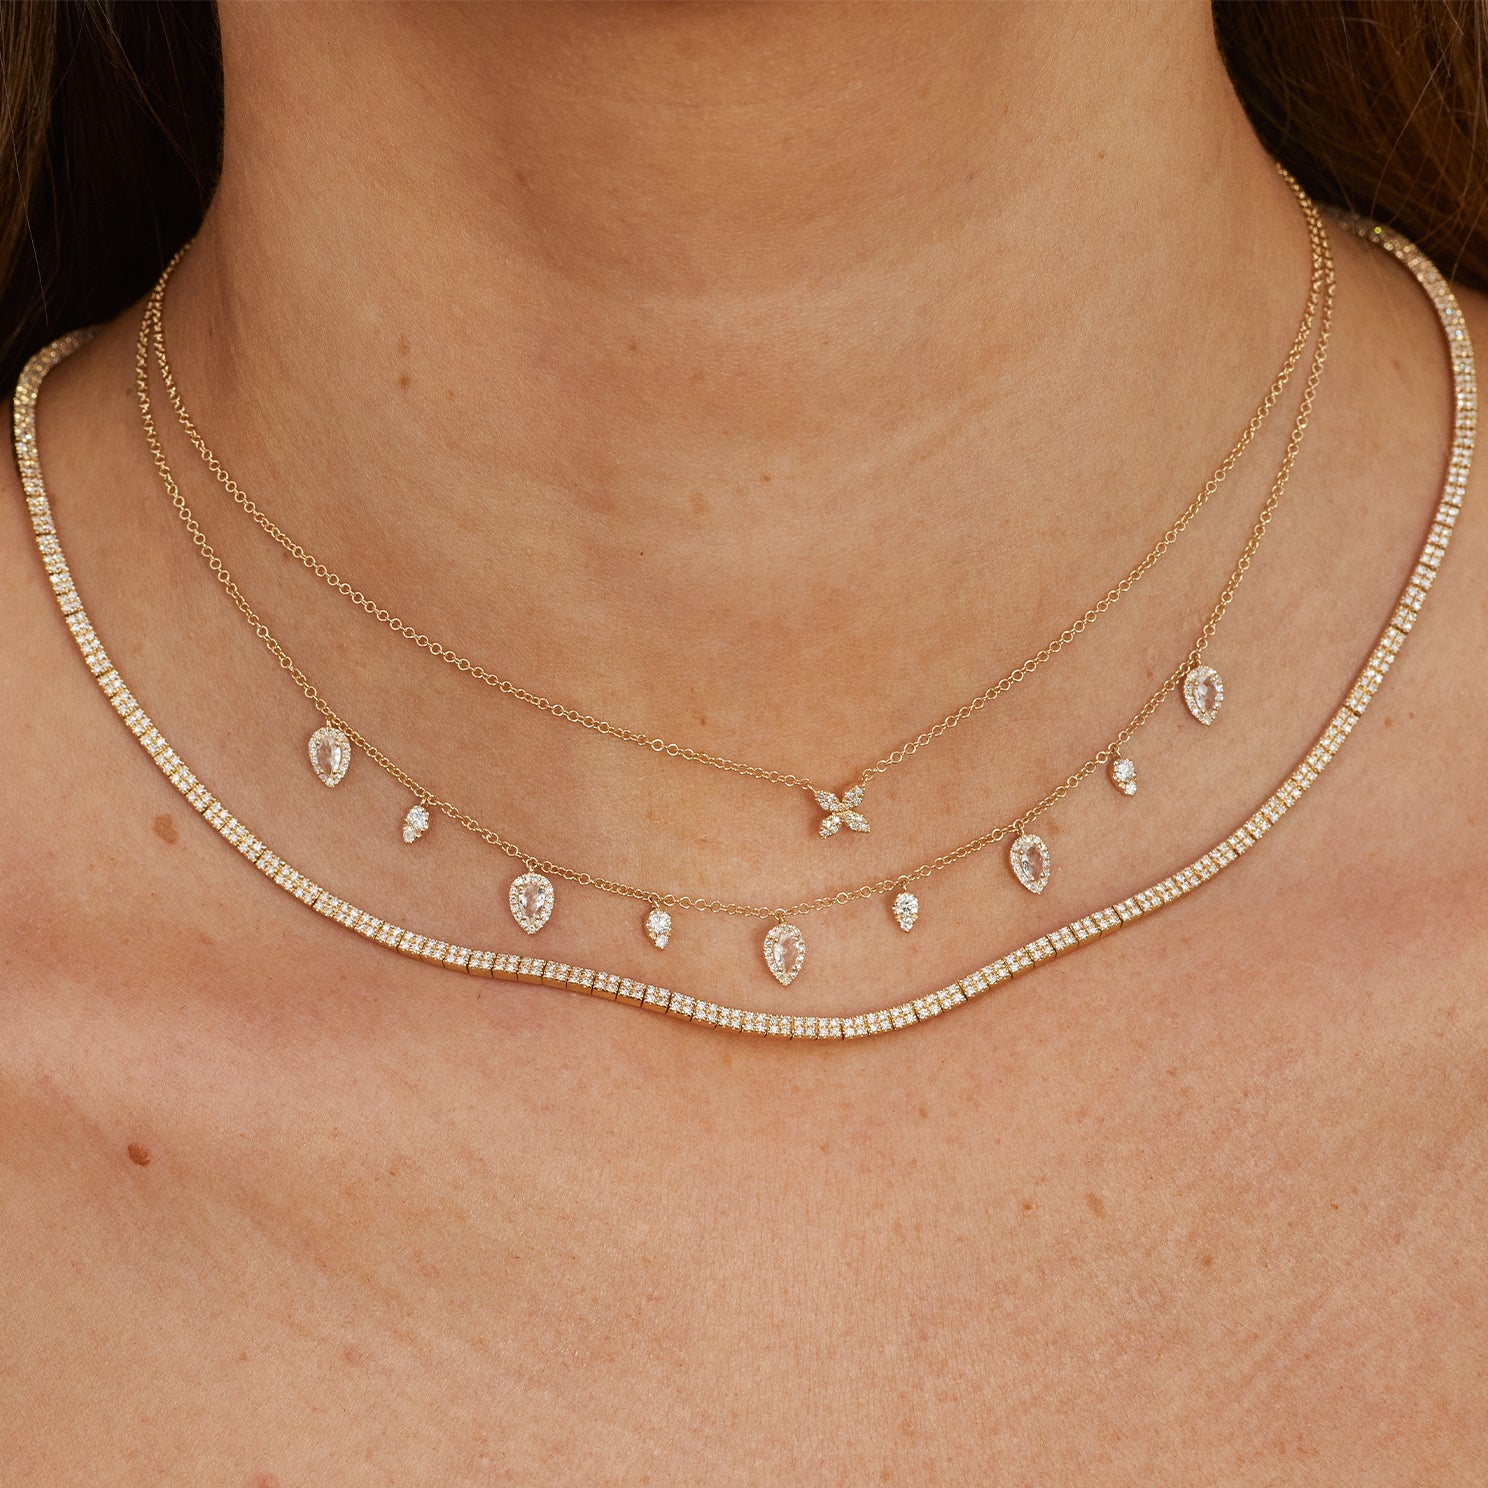 Diamond Blossom Necklace in 14k yellow gold styled on neck of model with 5 teardrop necklace and diamond segment necklace